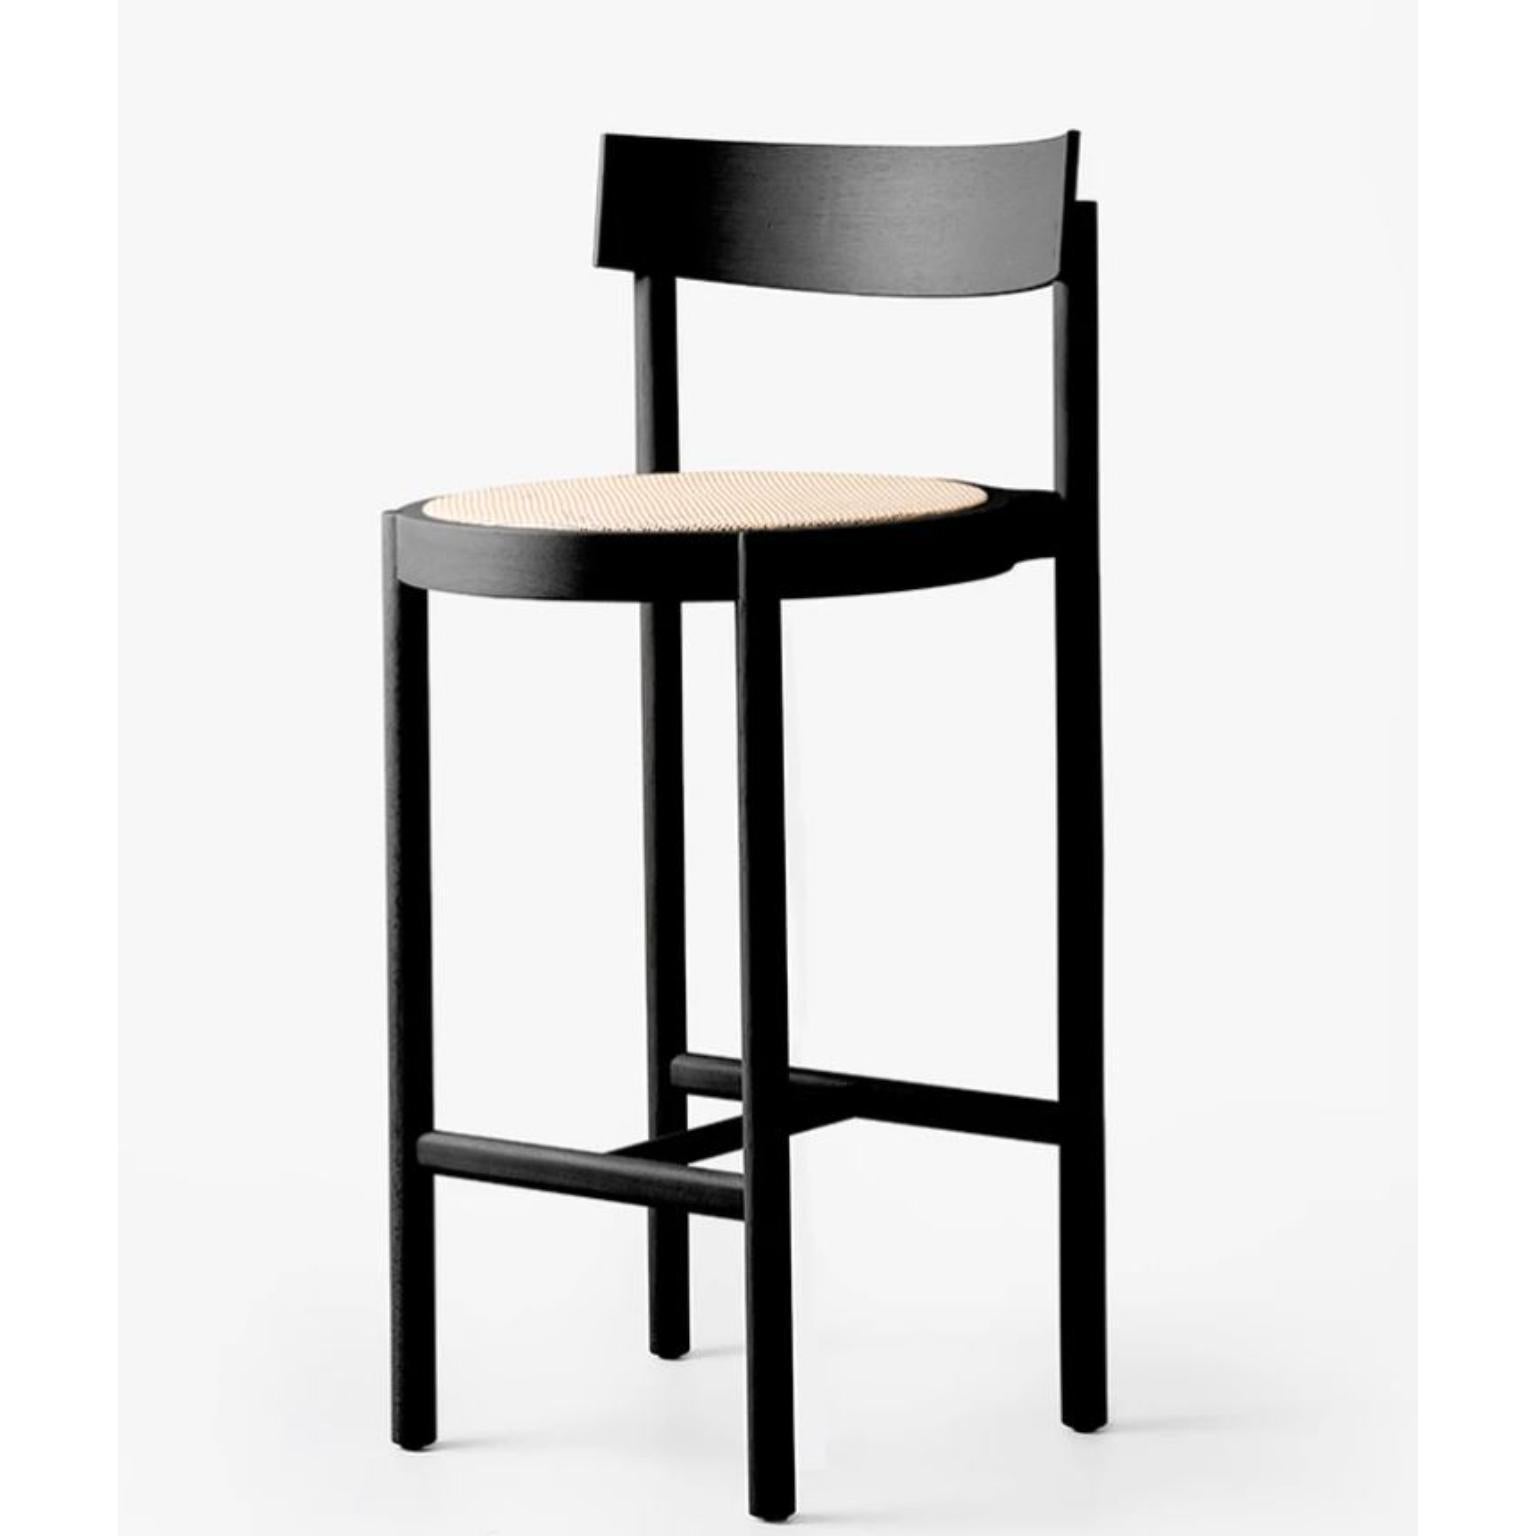 Black Gravatá Counter Stool by Wentz
Dimensions: D 52 x W 47 x H 90 cm
Materials: Tauari Wood, Cane/Upholstery.
Weight: 4,4kg / 9,7 lbs

The Gravatá series synthesizes our vision regarding the functional and visual simplicity of furniture. Through